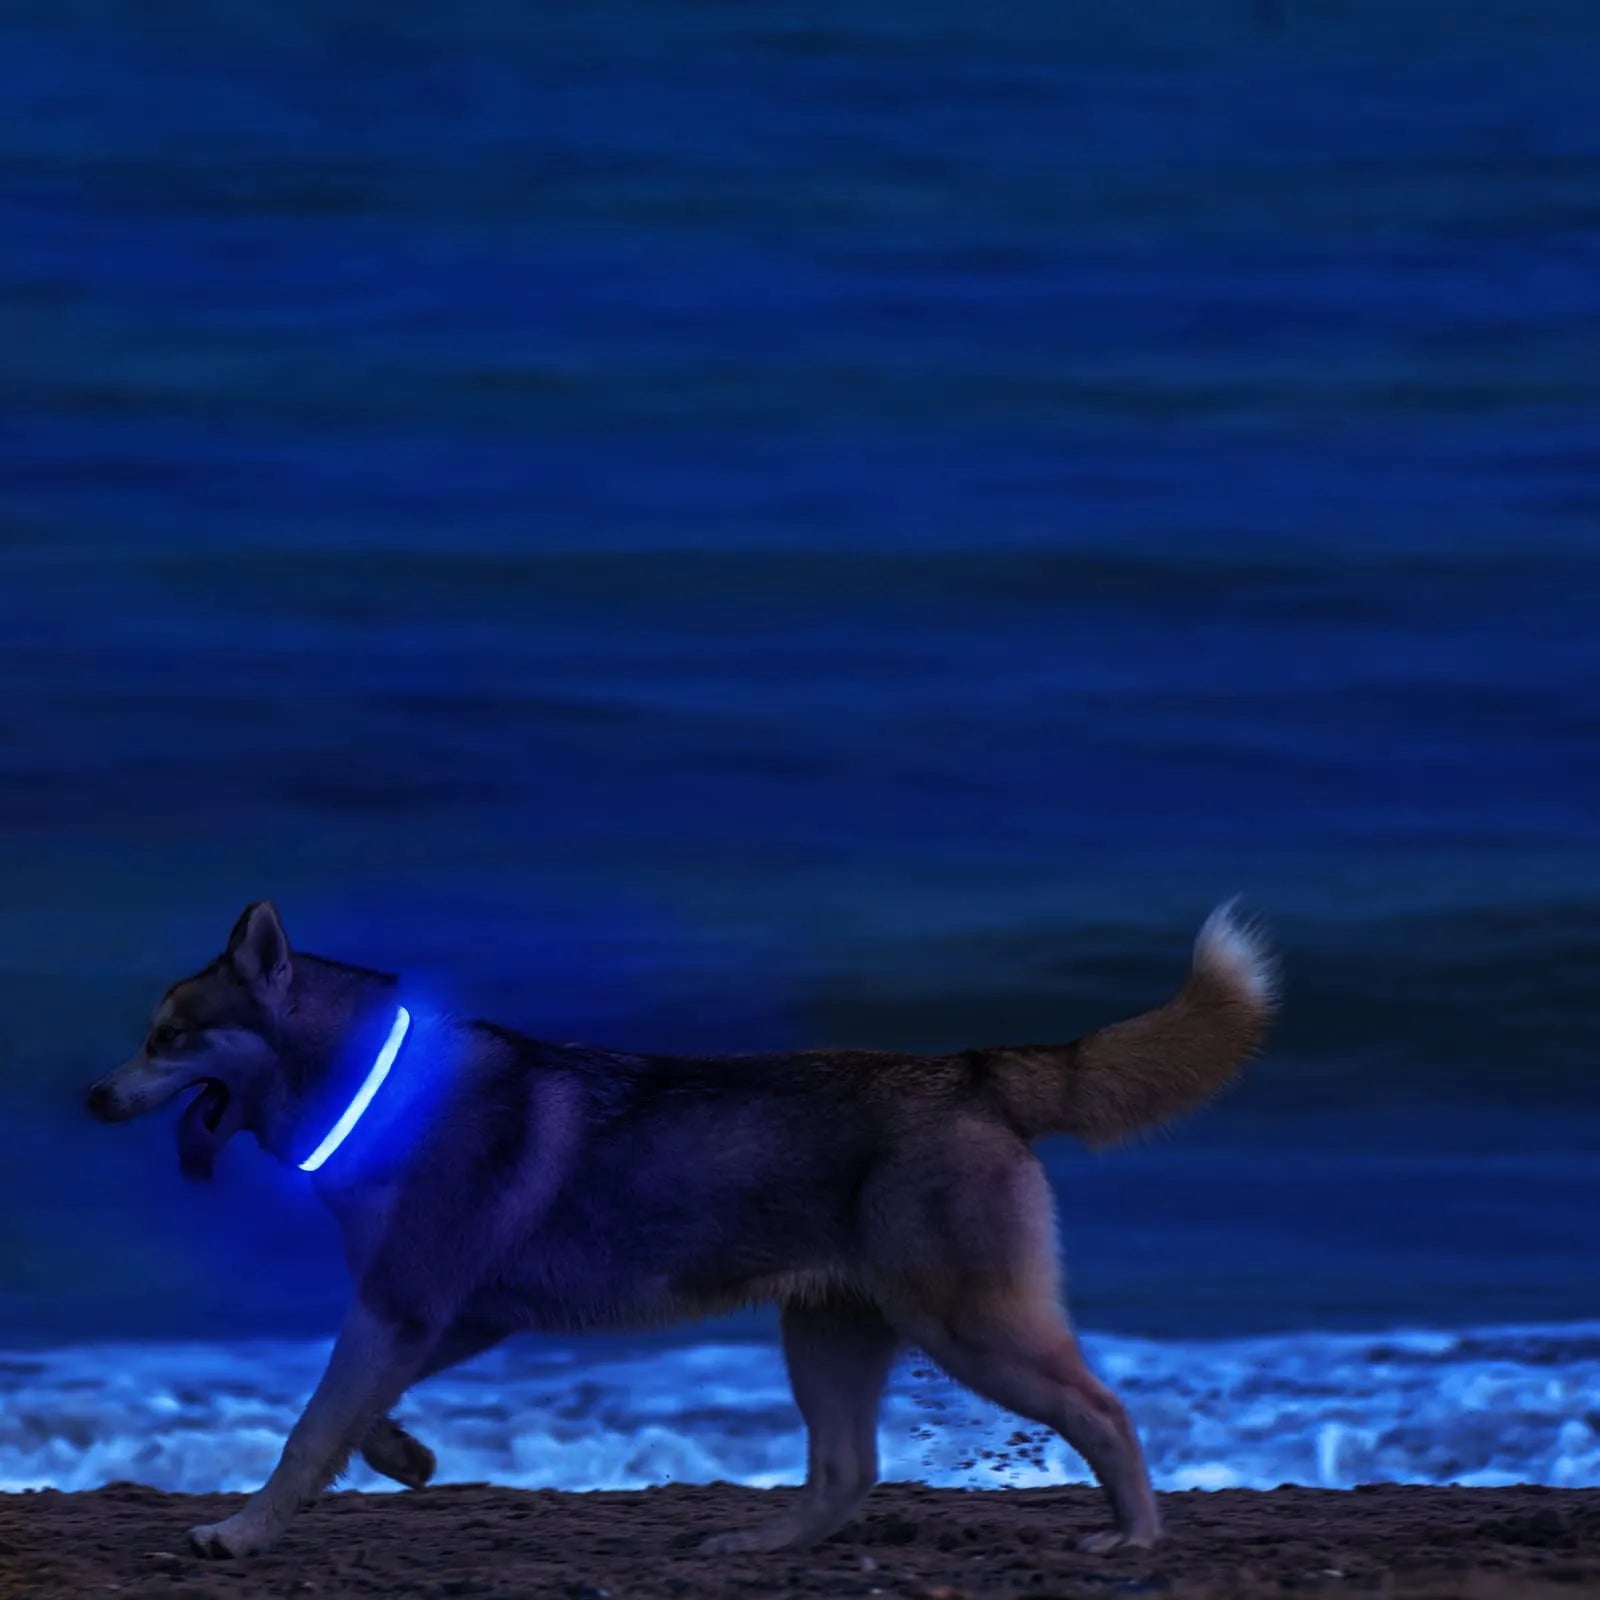 LED Dog Collar: Stay Visible & Safe at Night with USB Rechargeable Lights  ourlum.com   